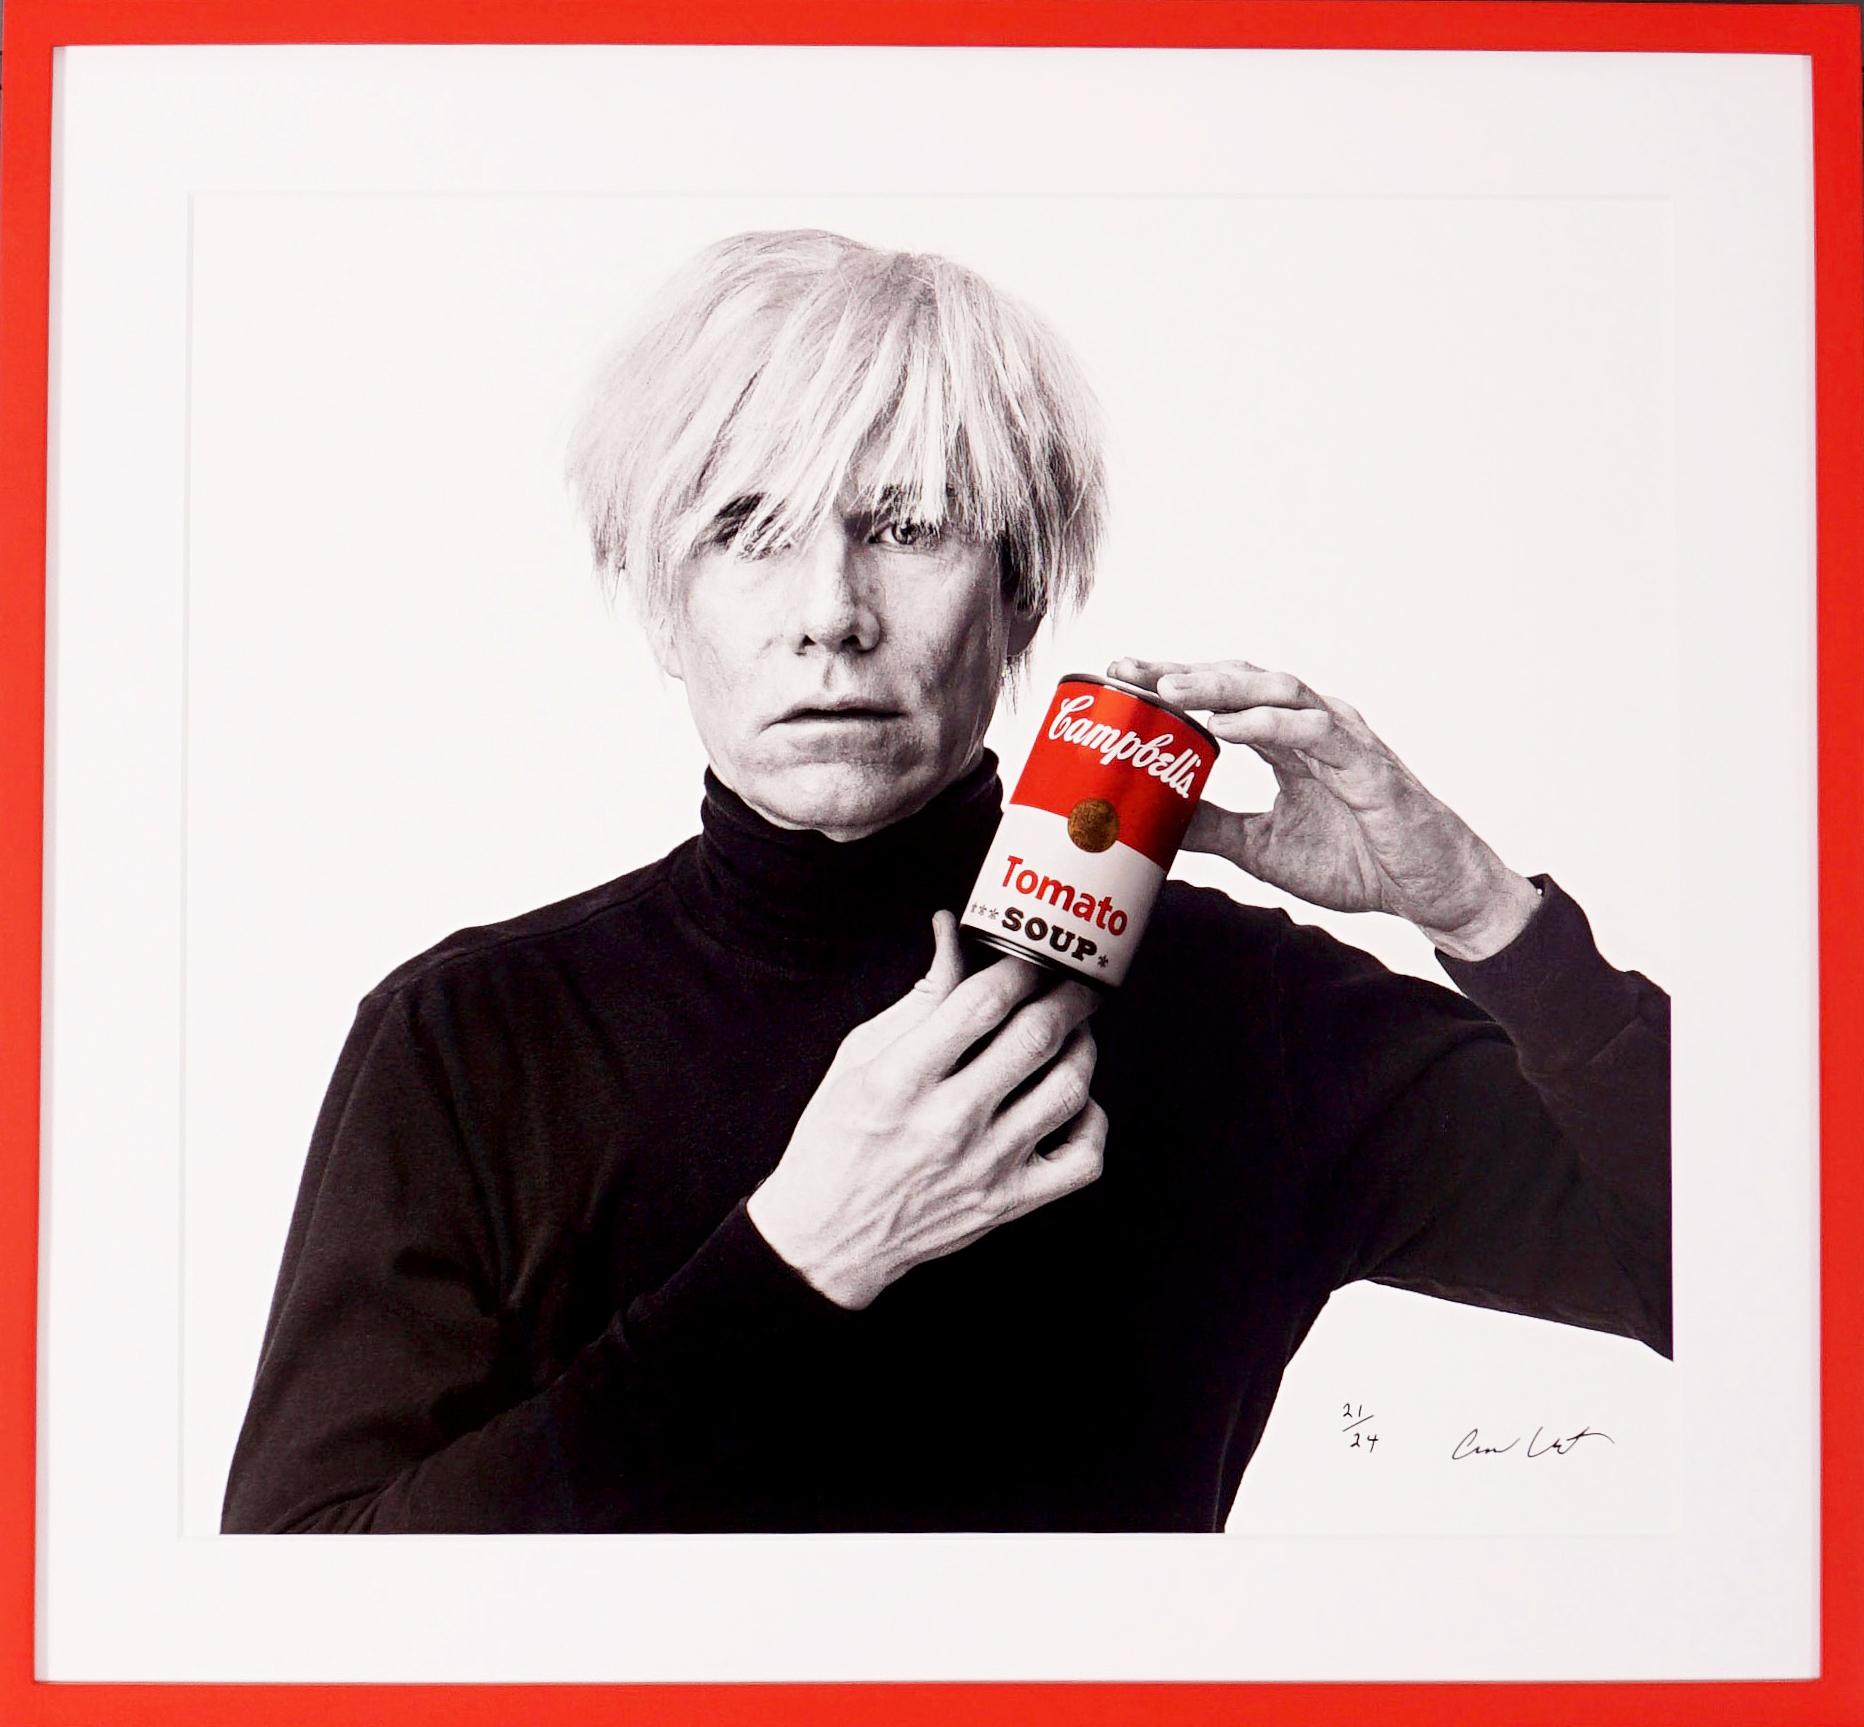 The ��‘Andy Warhol with Campbell’s Soup Can’ was shot in 1985 by photographer Andrew Unangst. This spectacular image of Warhol is one of the very last taken  and part of an exclusive edition of prints released in 2017 as the photos had been in